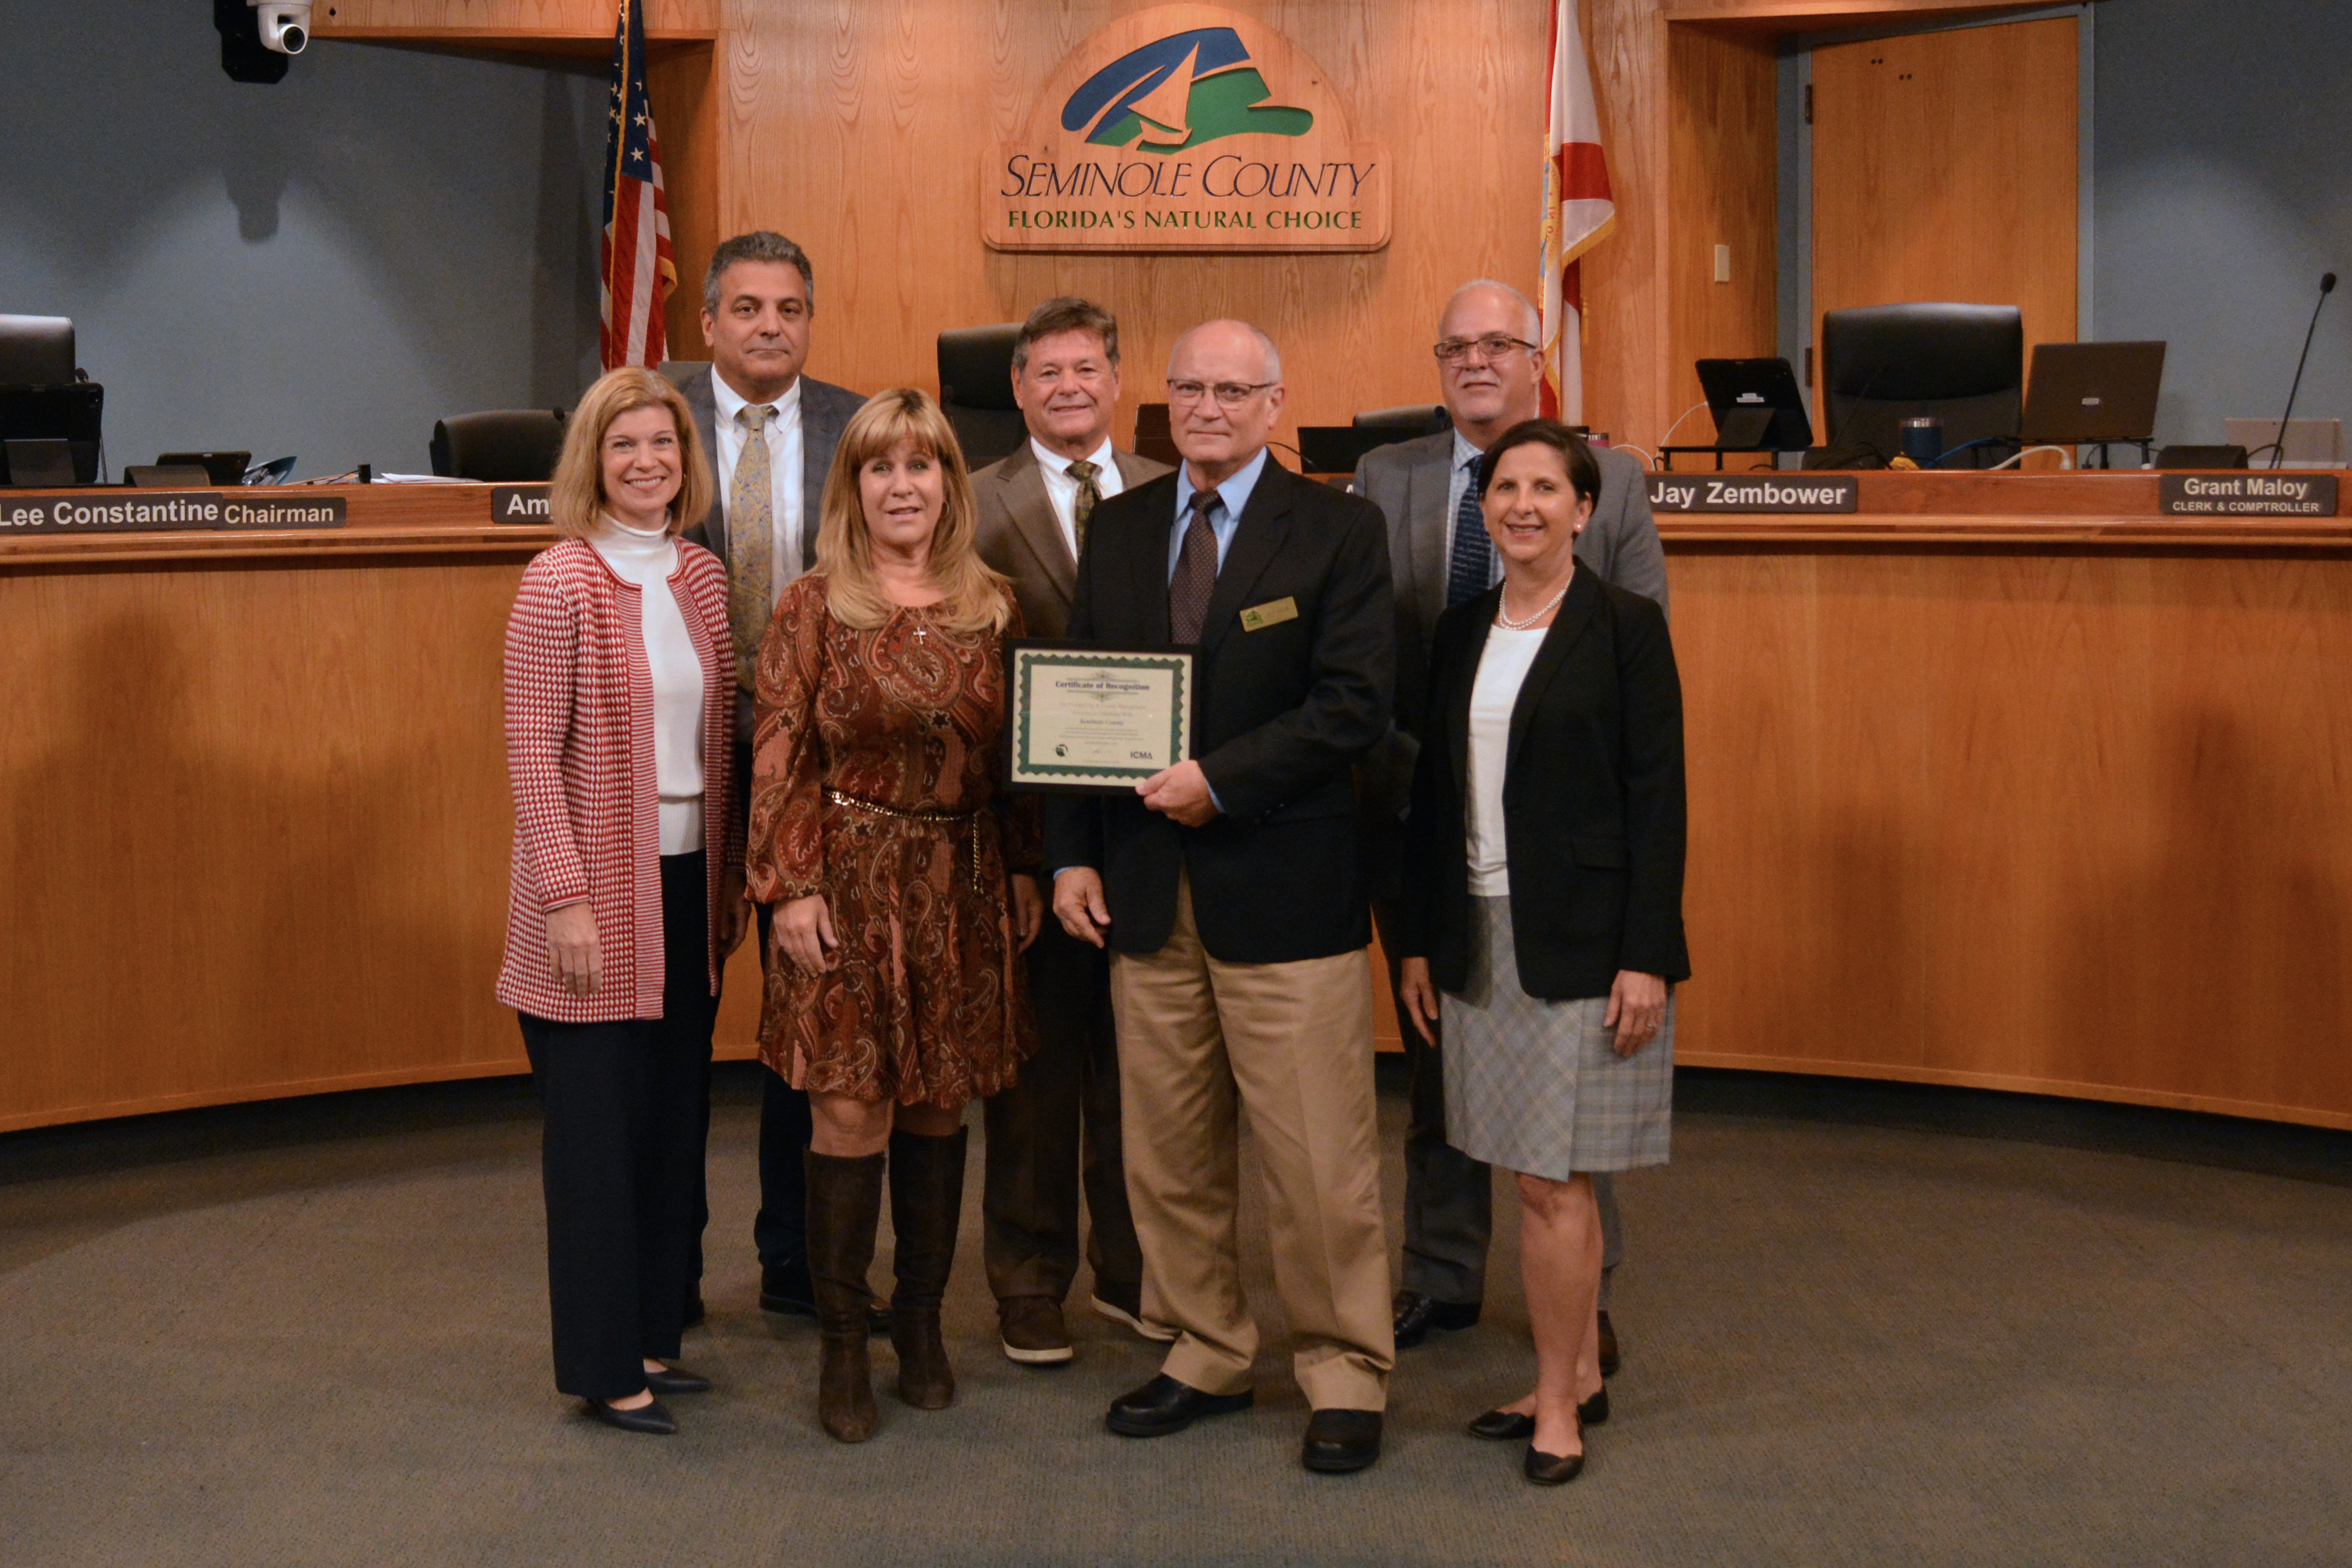 The Florida City & County Management Association celebrates with Seminole County the 30th anniversary of the county’s recognition by the International City/County Management Association (ICMA) under the commission-manager form of government